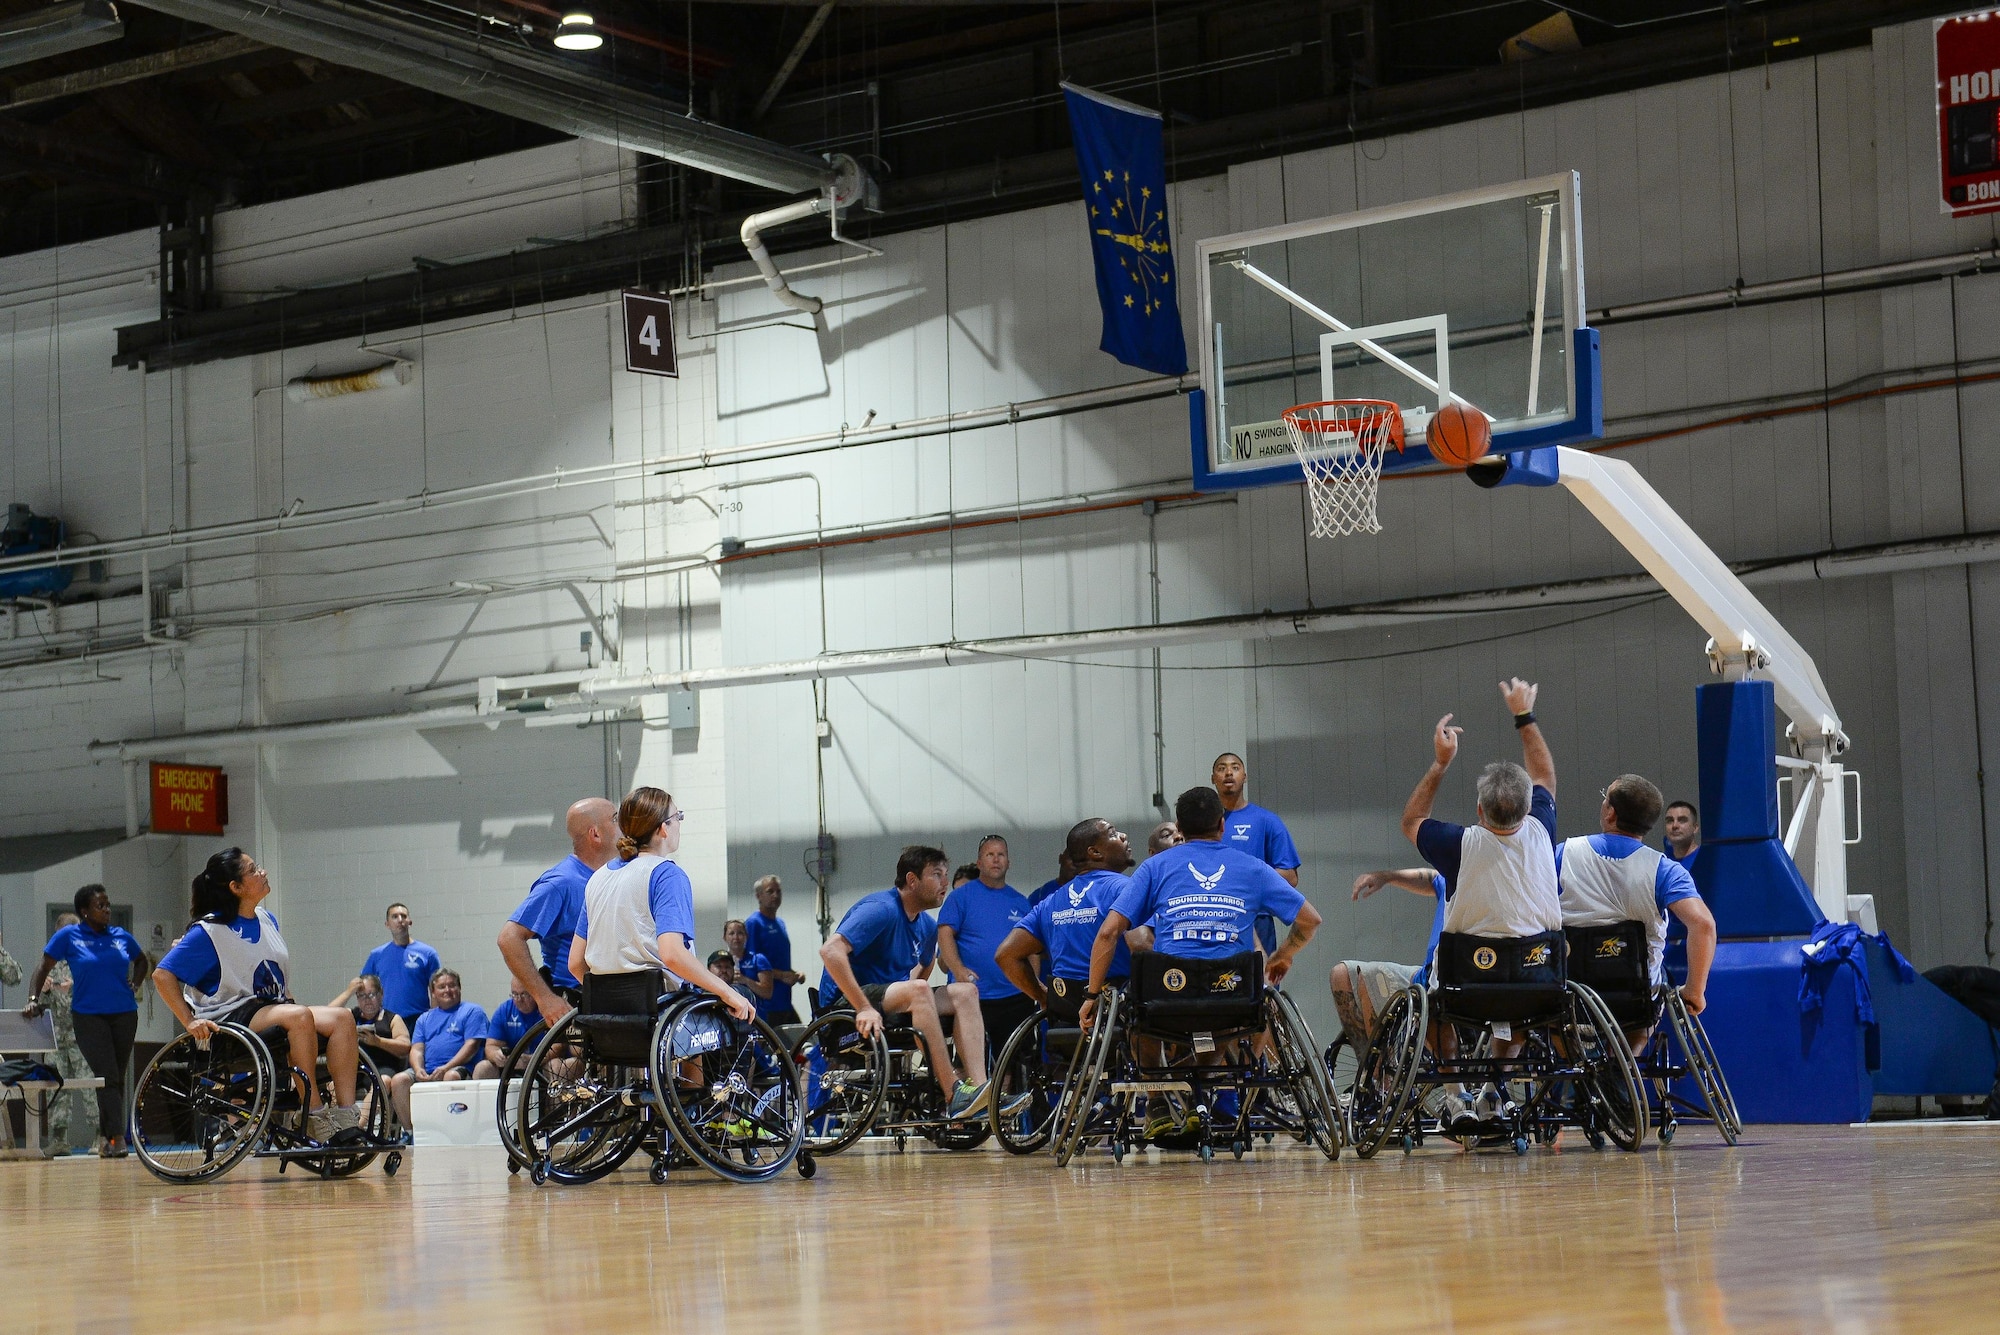 Wounded Warriors play seated basketball in the Offutt Field House at Offutt Air Force Base, Neb., Sept. 21, 2016. Wounded warriors is an adaptive sports competition for wounded, ill and injured service members and veterans. (U.S. Air Force photo by Zachary Hada)